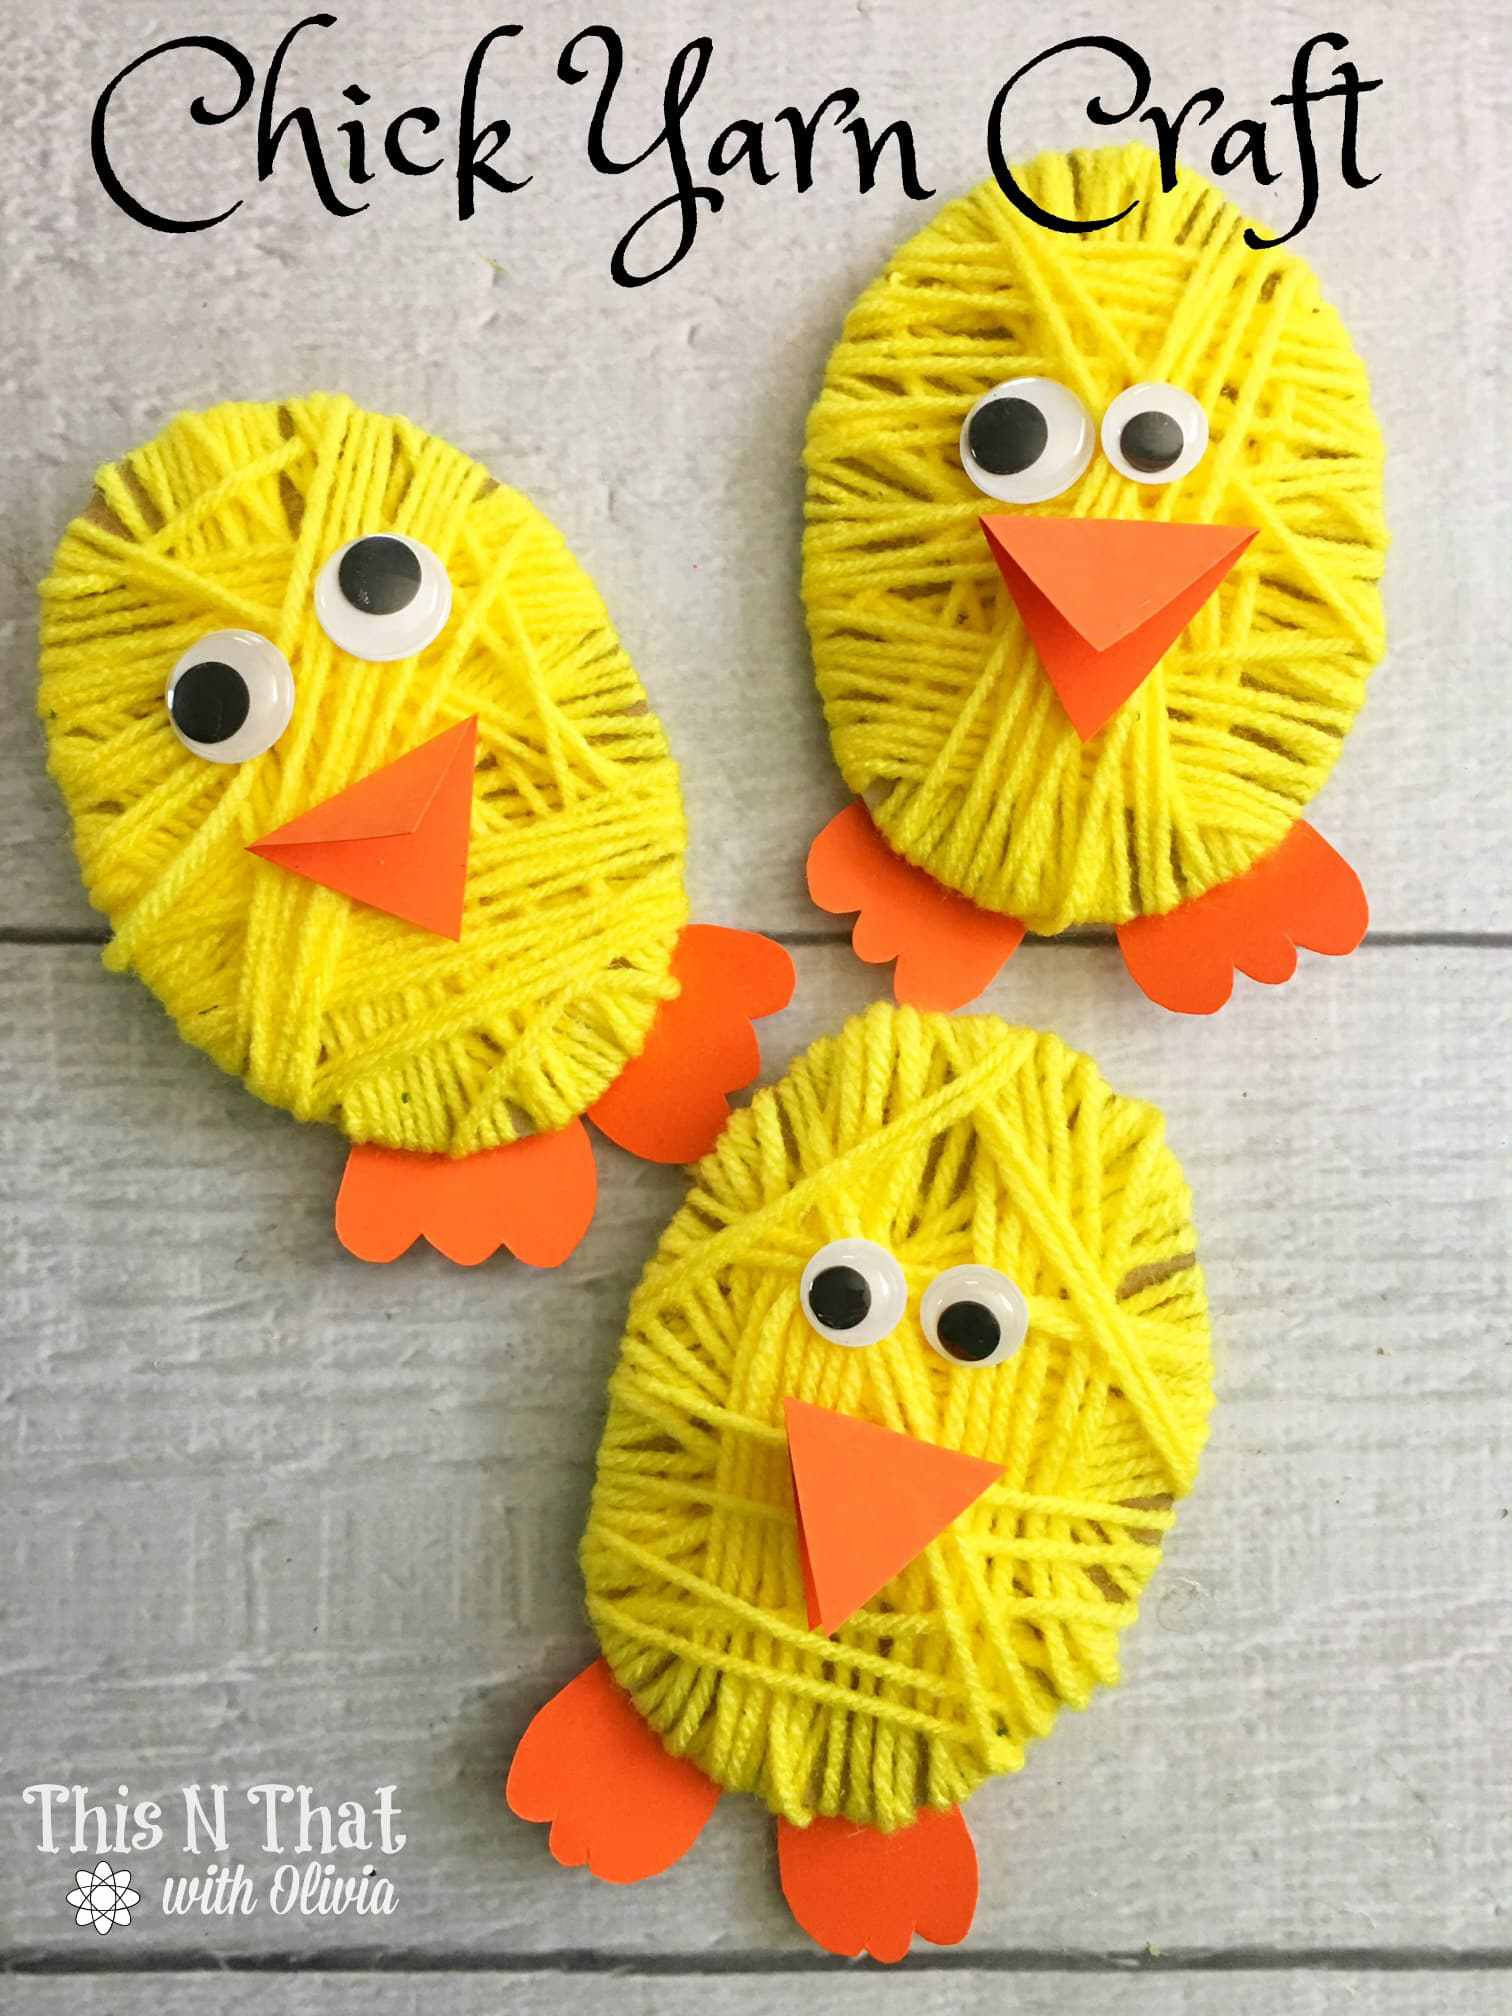 Preschool Craft Ideas
 Over 33 Easter Craft Ideas for Kids to Make Simple Cute